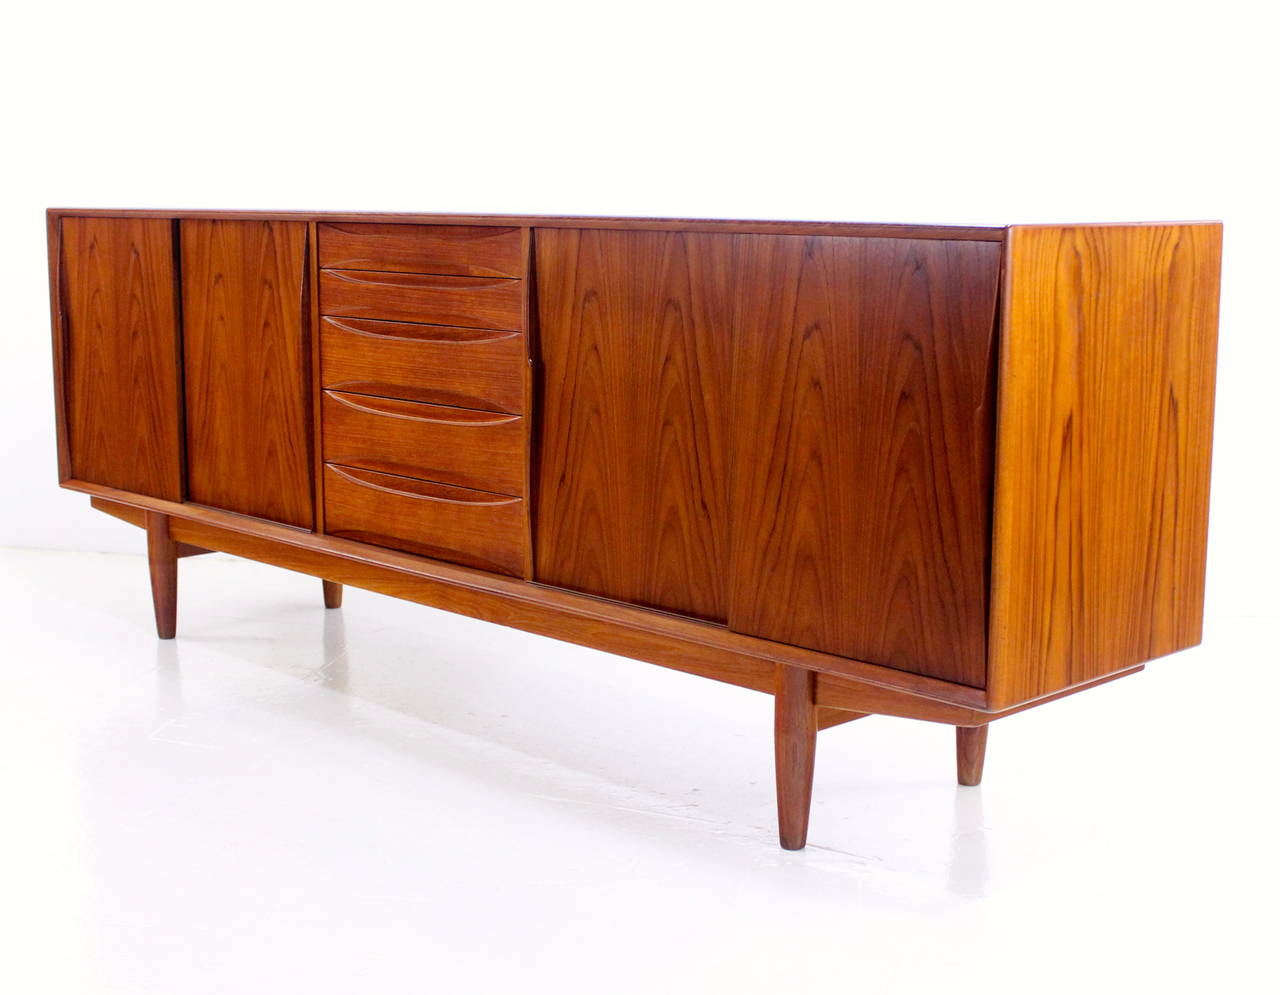 Danish modern credenza by Dyrlund.
Richly grained teak with classic lines and beautifully sculptured handles.
Five drawers in the center, the top two are felt lined.
Sliding doors open to adjustable shelves on each end.
Finished on the back for